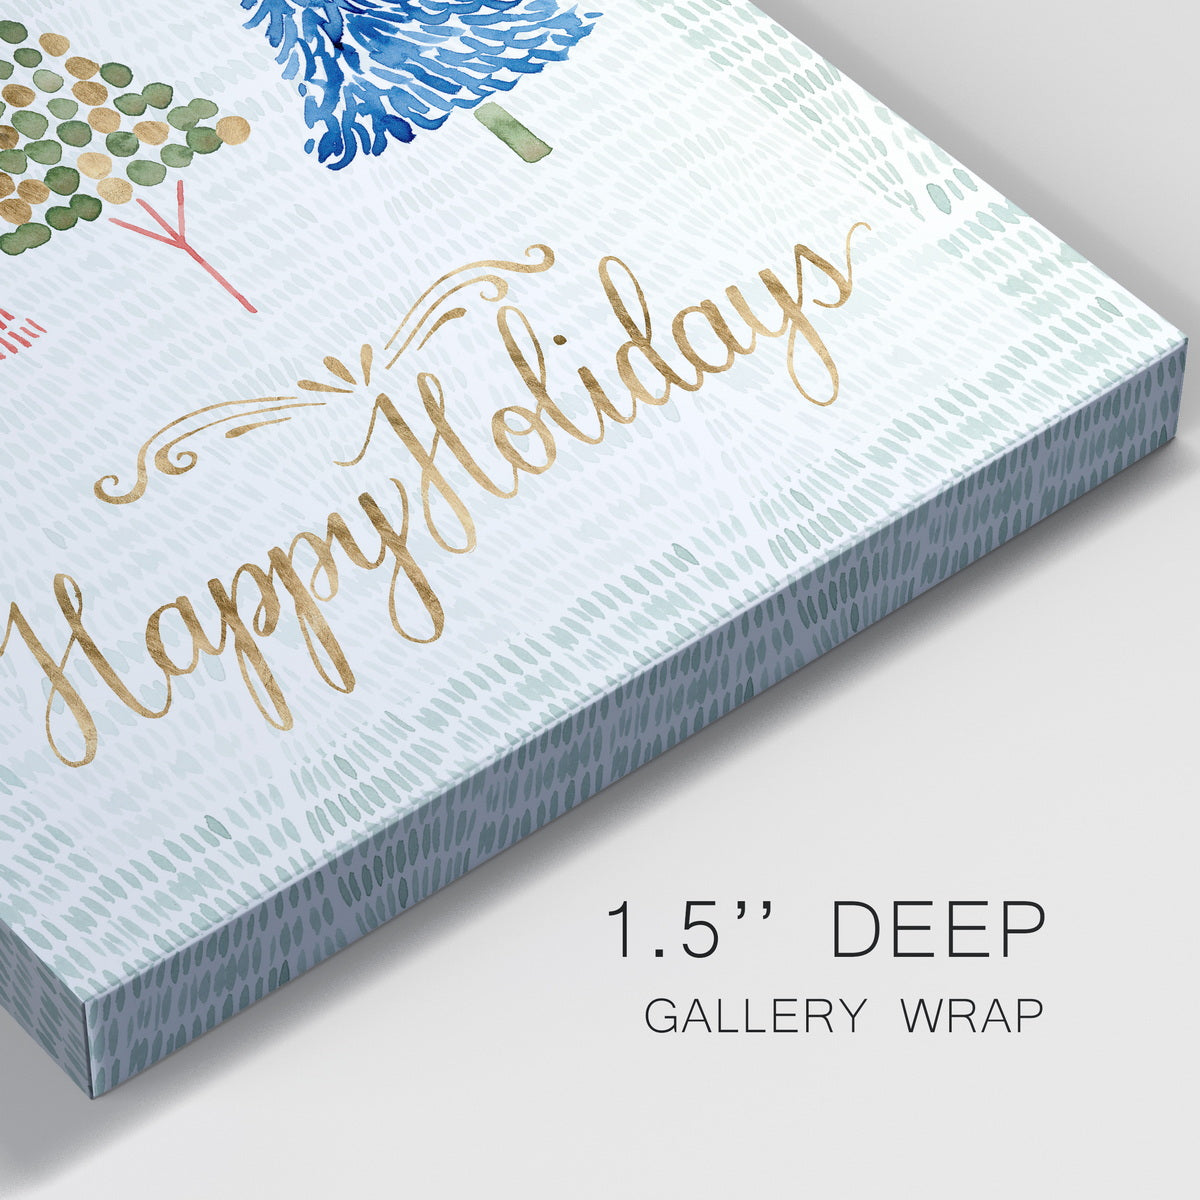 Christmas Tree Whimsy I-Premium Gallery Wrapped Canvas - Ready to Hang